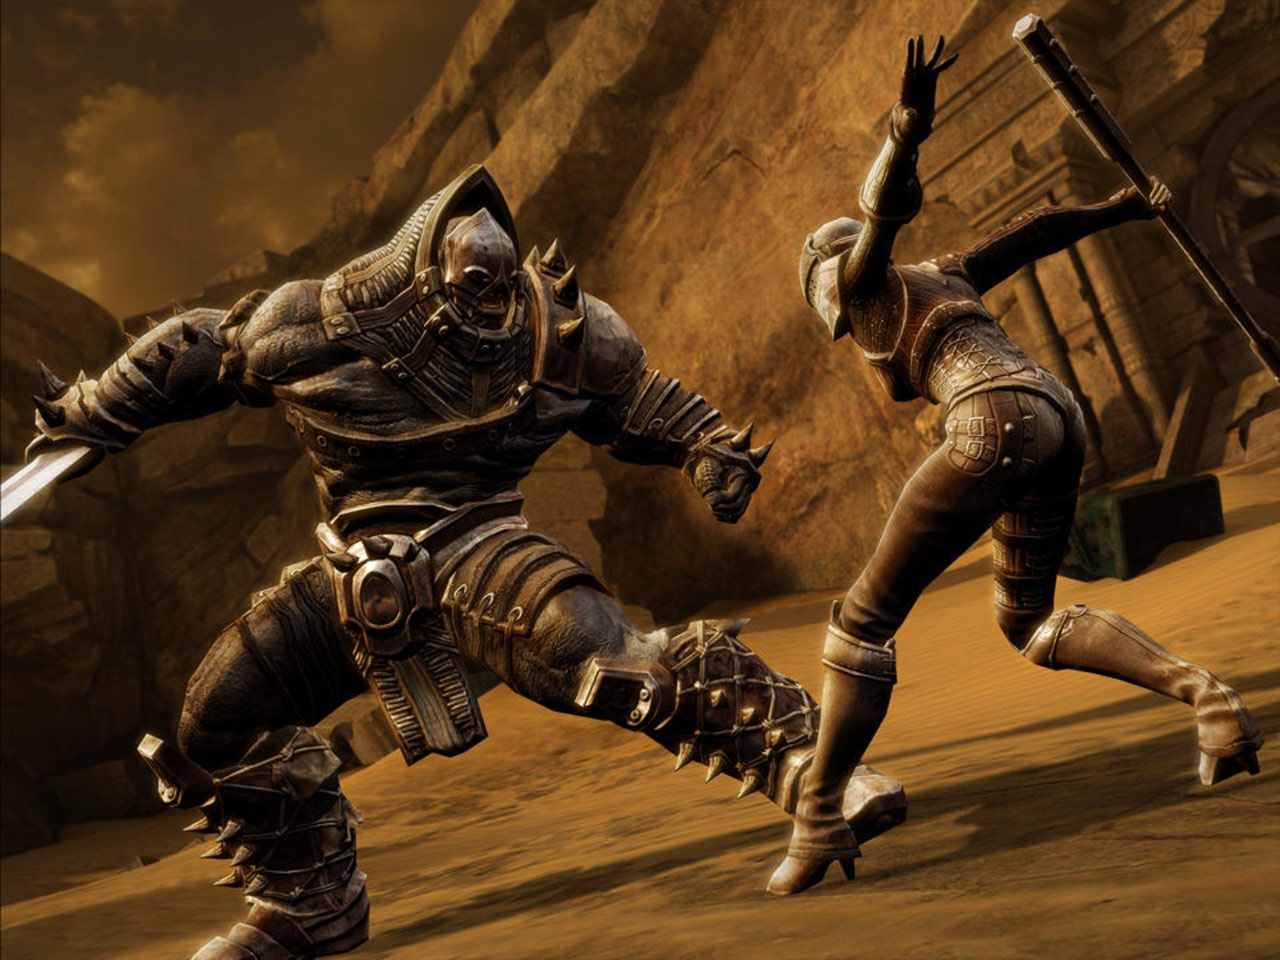 download game infinity blade 2 for pc